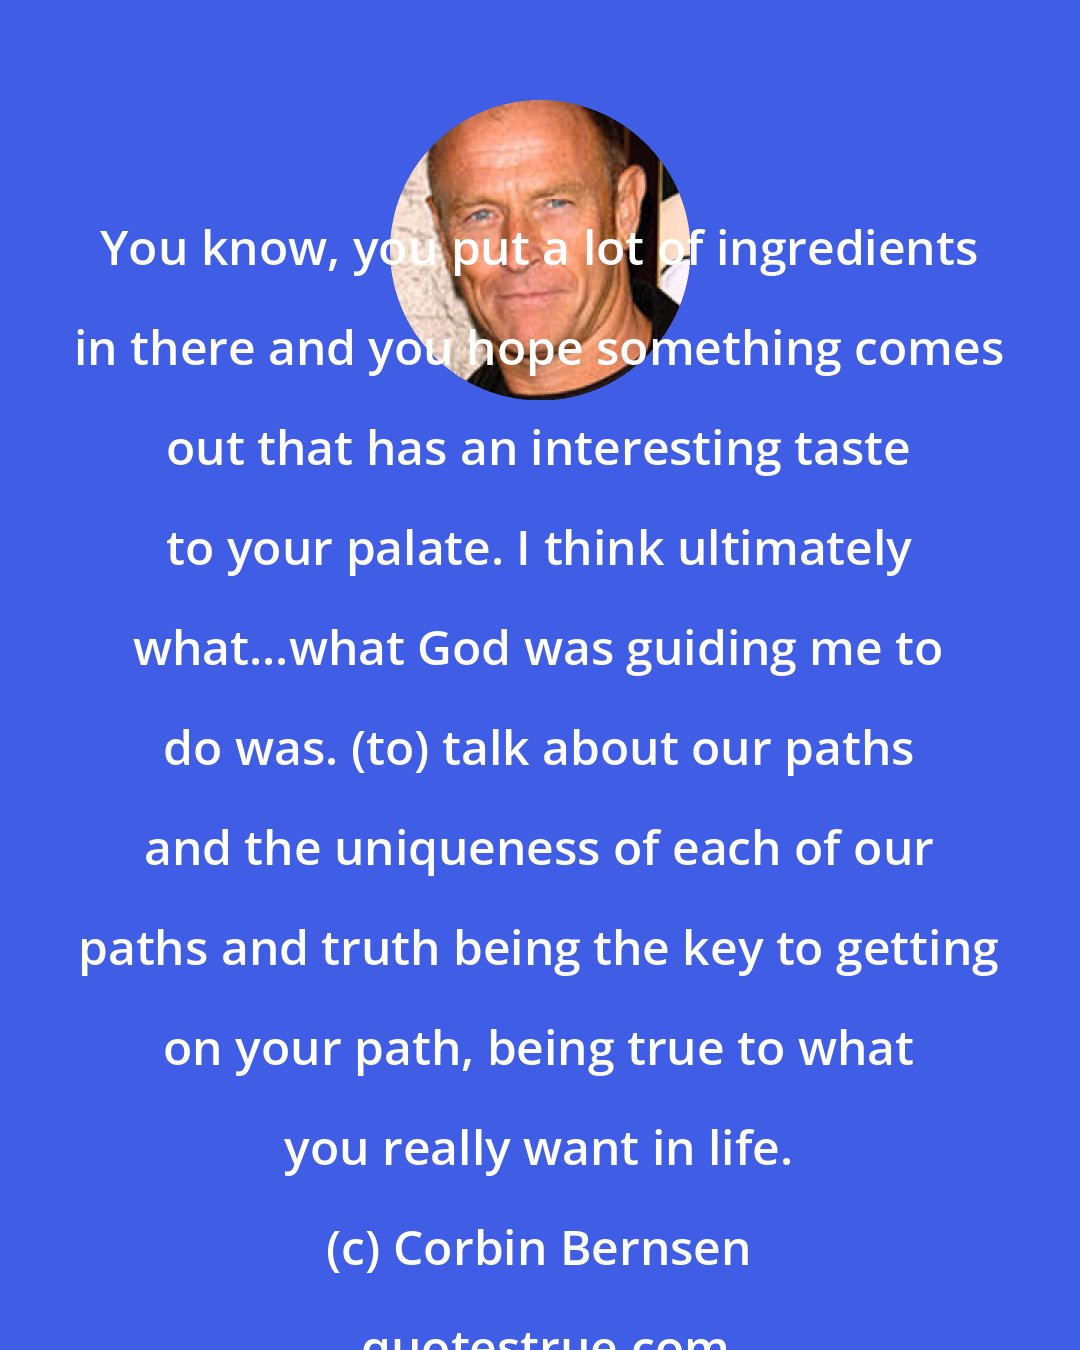 Corbin Bernsen: You know, you put a lot of ingredients in there and you hope something comes out that has an interesting taste to your palate. I think ultimately what...what God was guiding me to do was. (to) talk about our paths and the uniqueness of each of our paths and truth being the key to getting on your path, being true to what you really want in life.